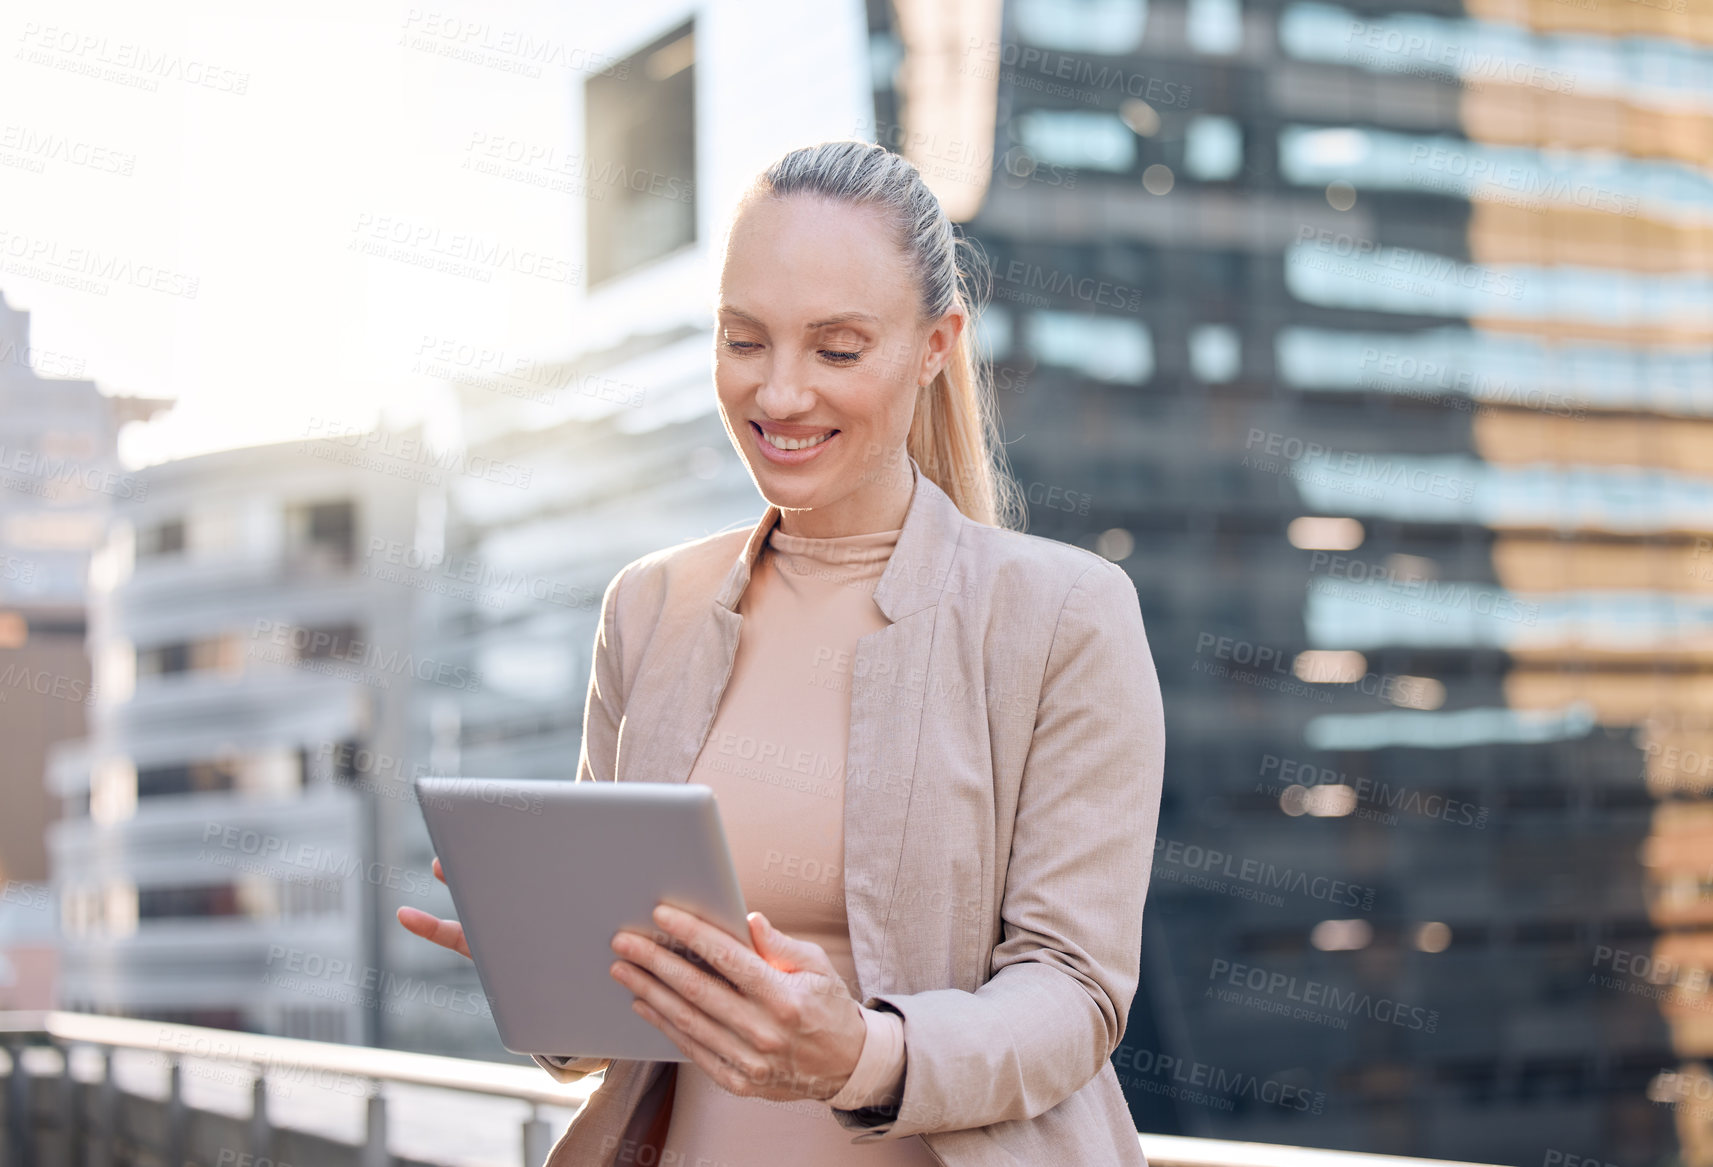 Buy stock photo Smile, businesswoman with tablet and happy in city background outdoors. Social media or connectivity, online communication and networking with female person writing an email on rooftop of building